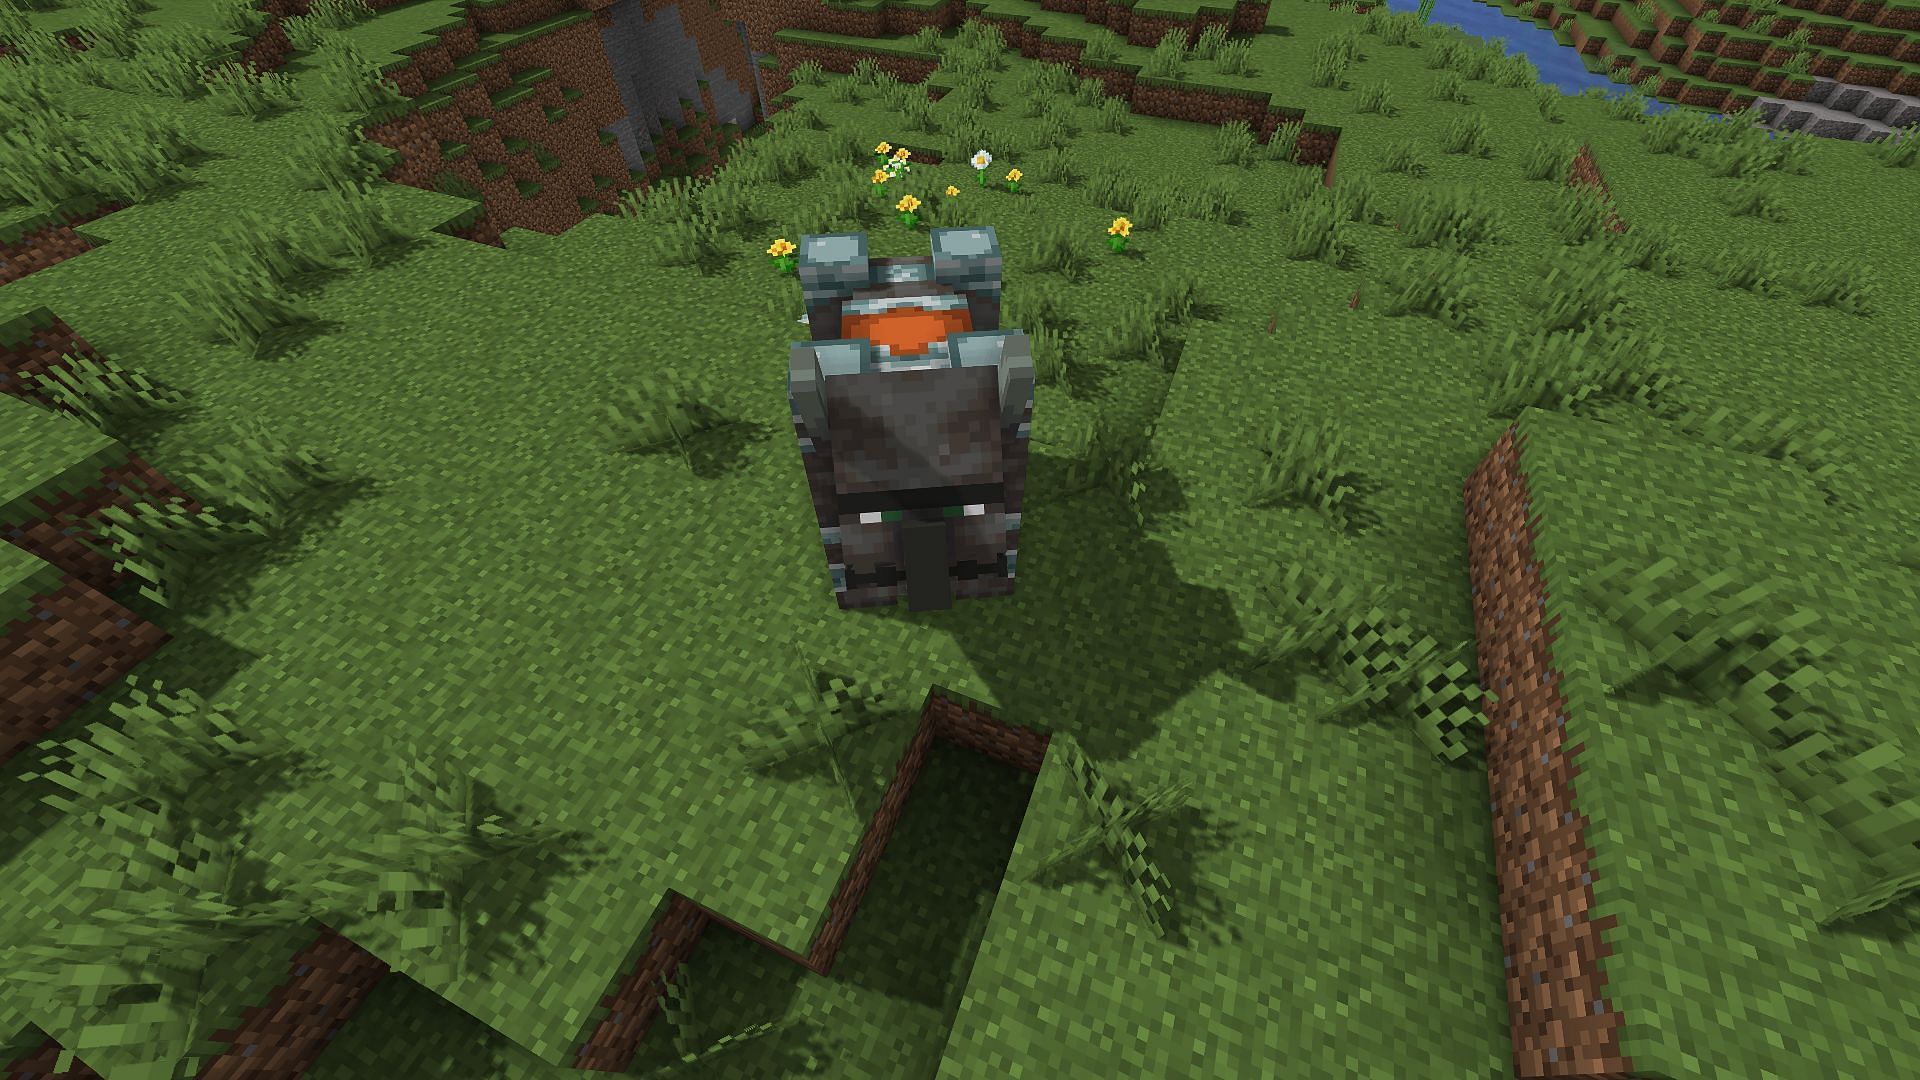 A Ravager in the wild (Image via Minecraft)